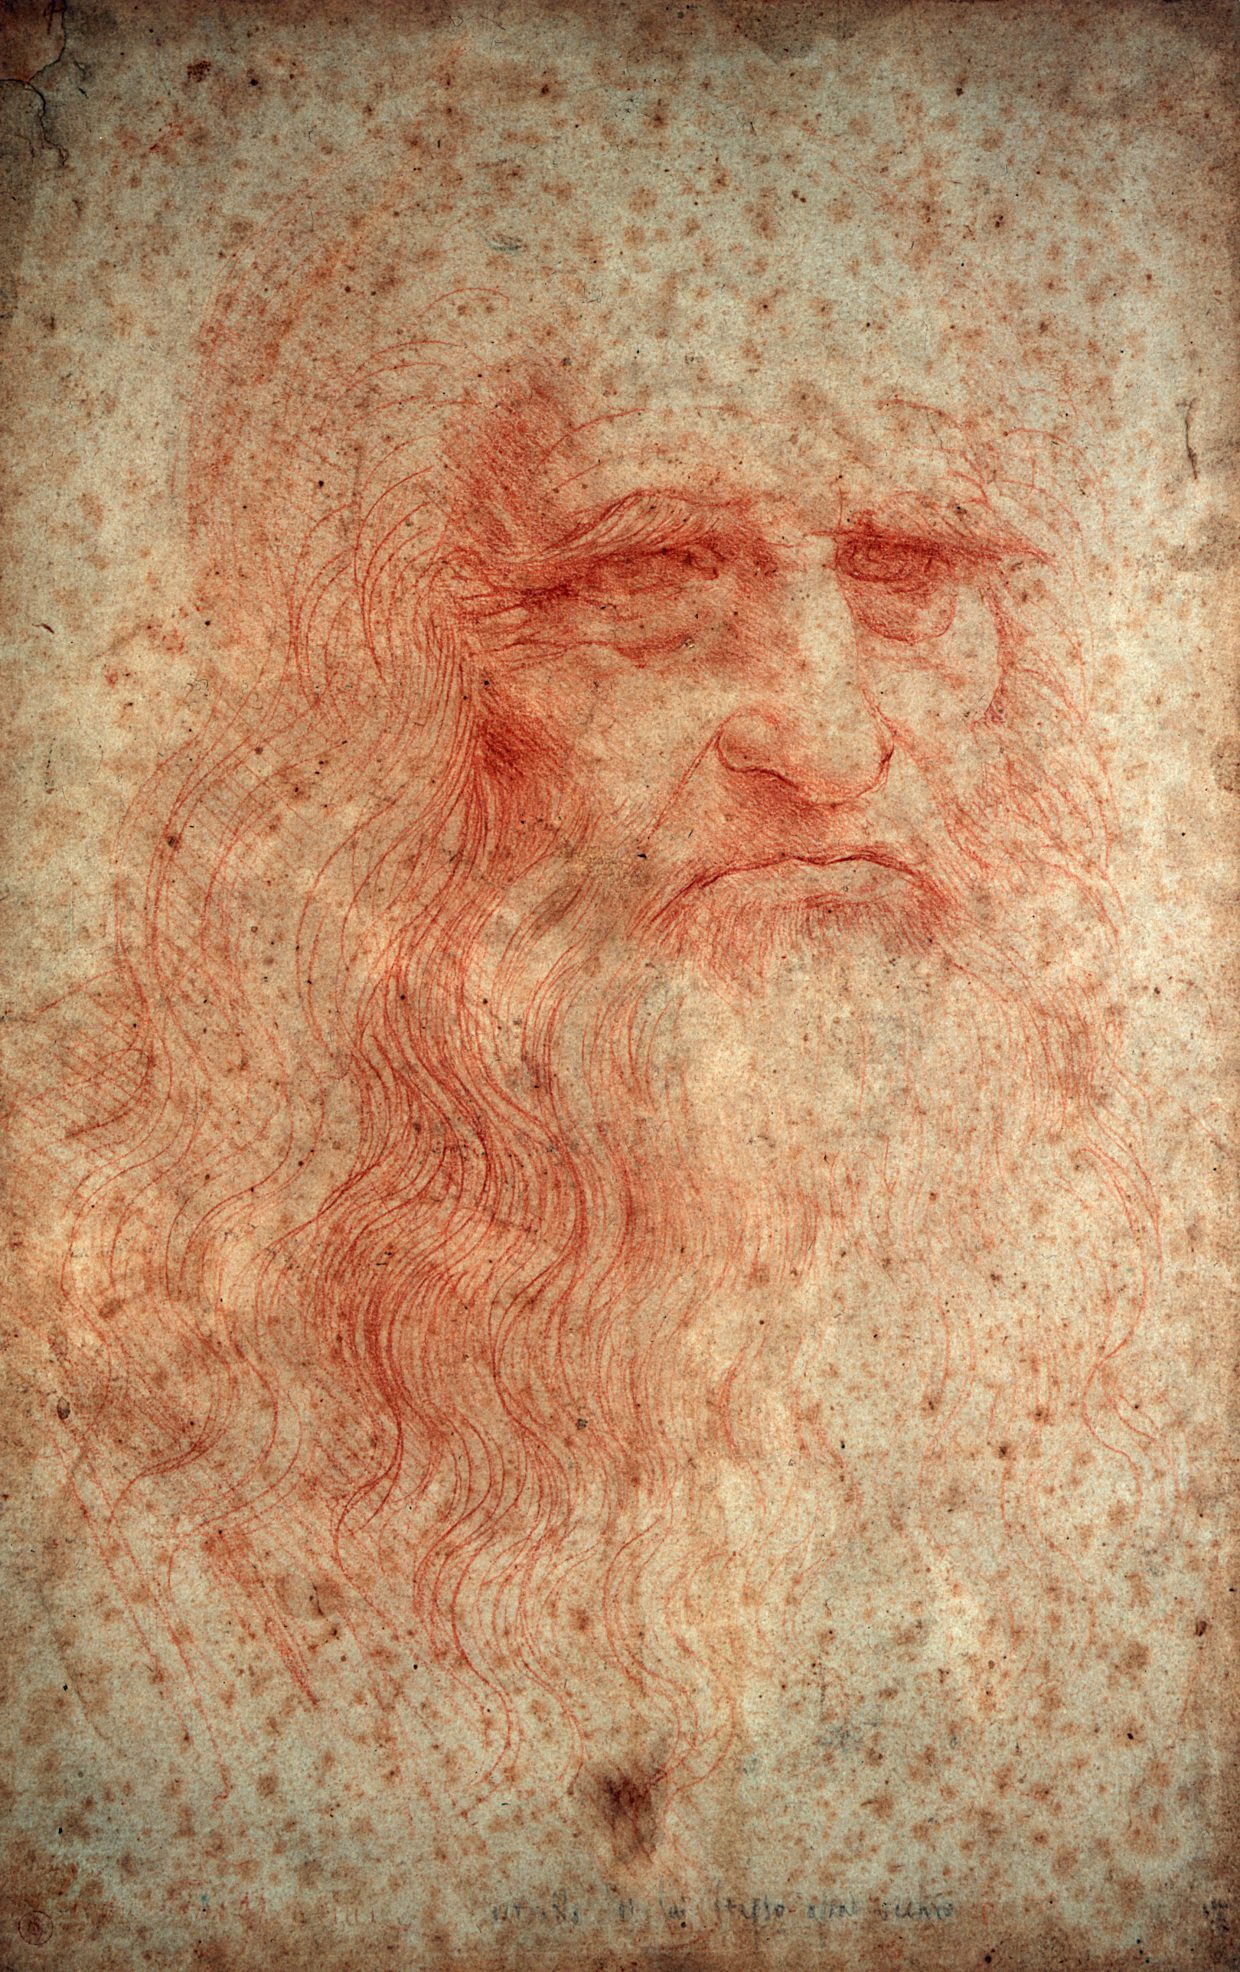 "Portrait of a Man in Red Chalk"